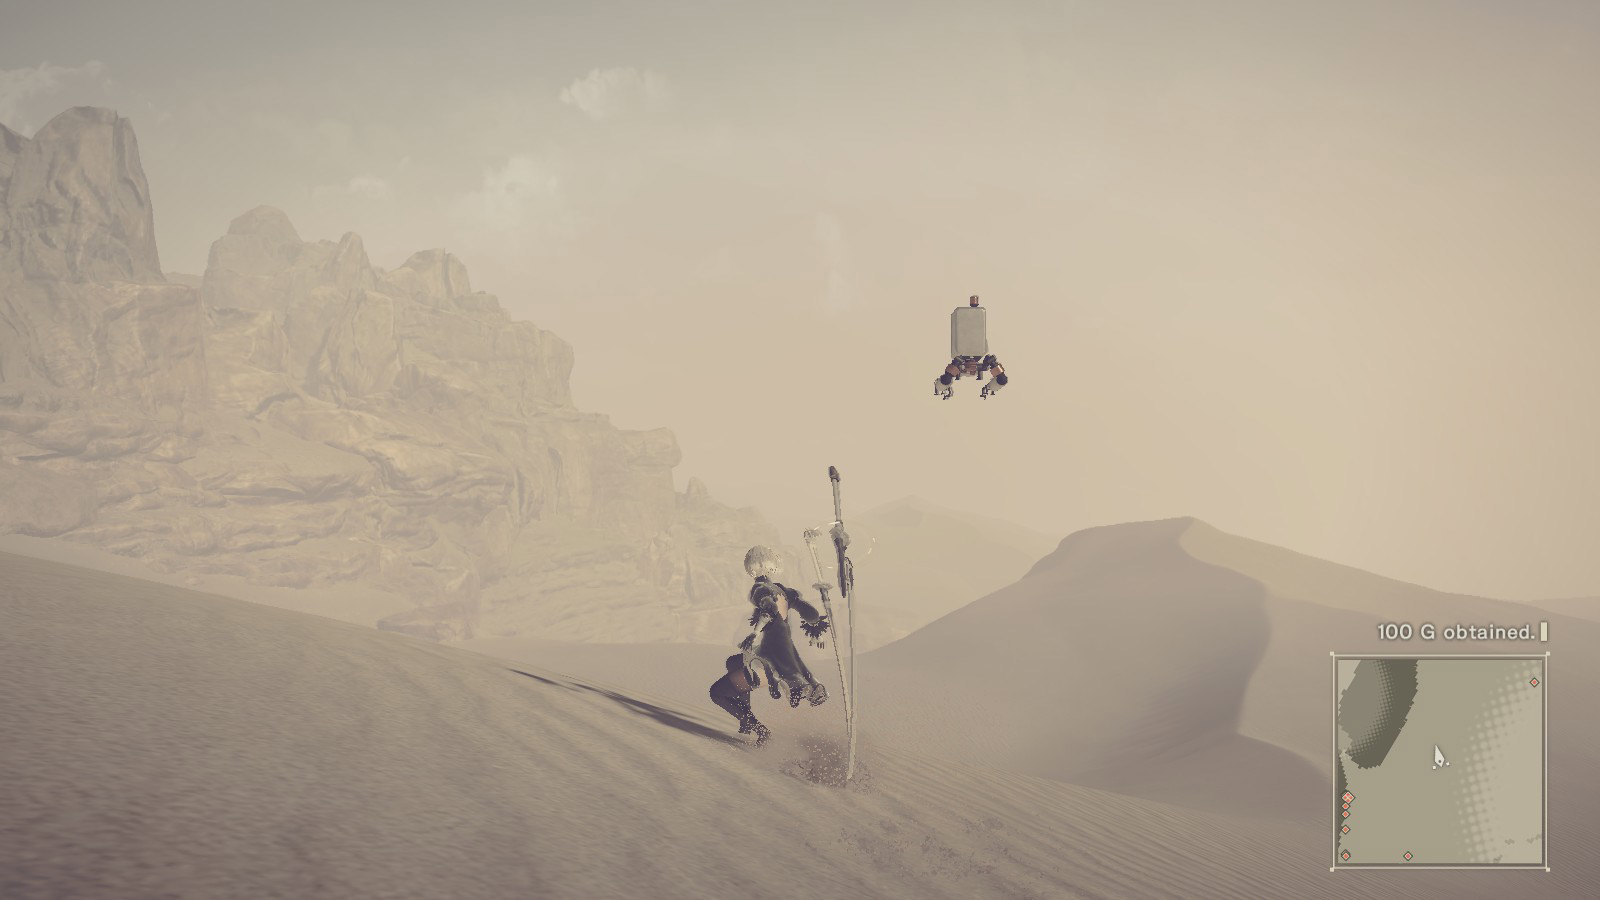 Nier: Automata. The android 2B is sliding down a sand dune.